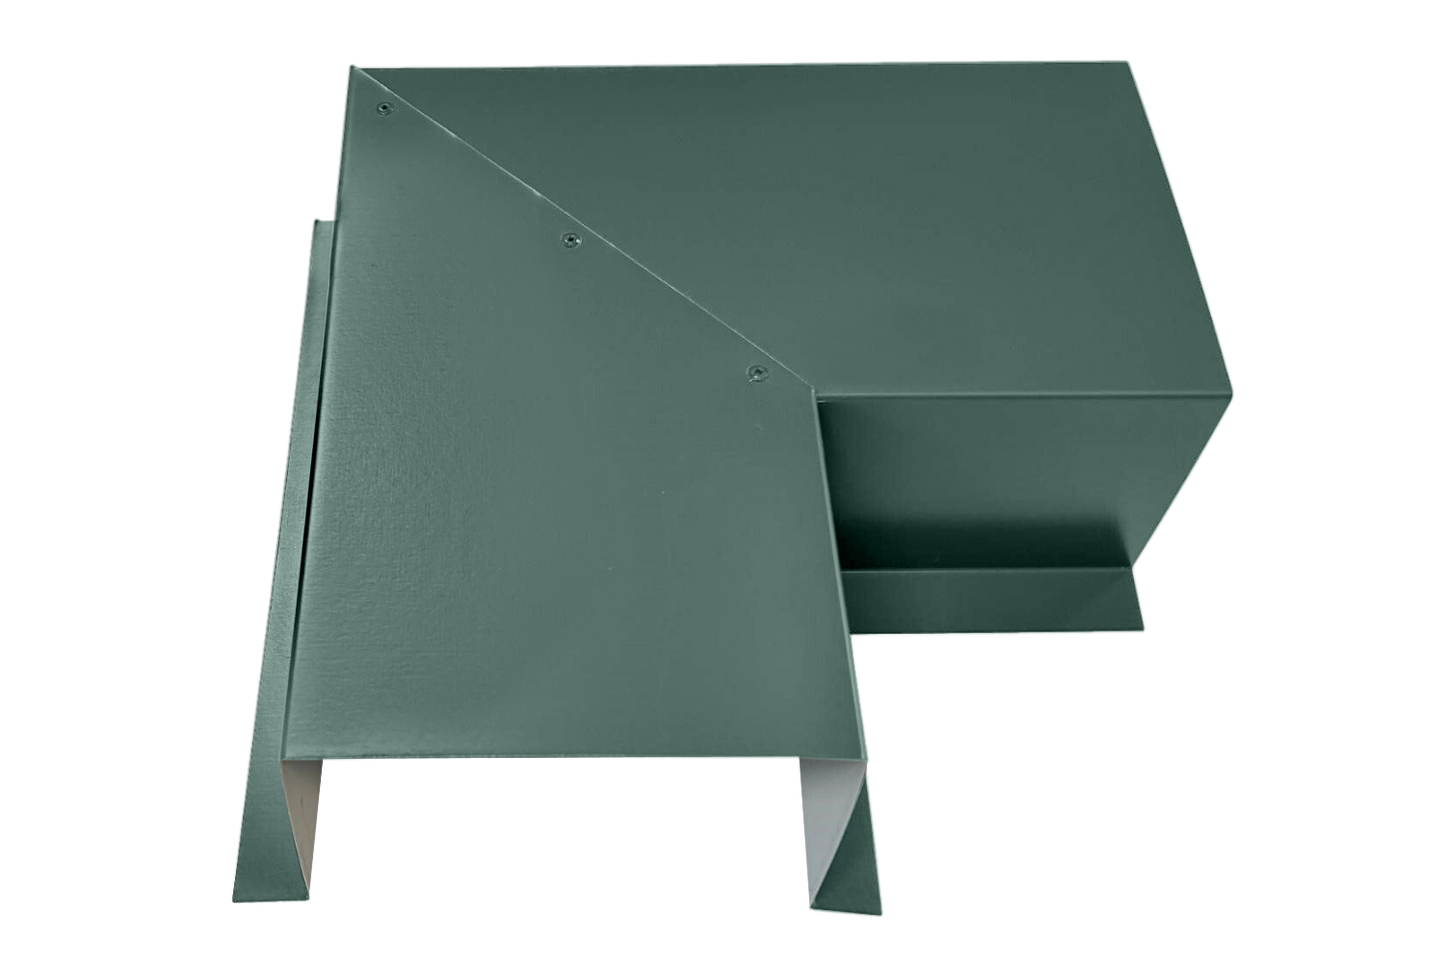 A green, geometric metal object with multiple triangular and rectangular surfaces, featuring sharp edges and small hinges or screws. Made from premium quality 24 gauge steel, the design suggests it could be a Perma Cover Commercial Series - 24 Gauge Line Set Cover Side Turning Elbows - Premium Quality. The background is plain white.